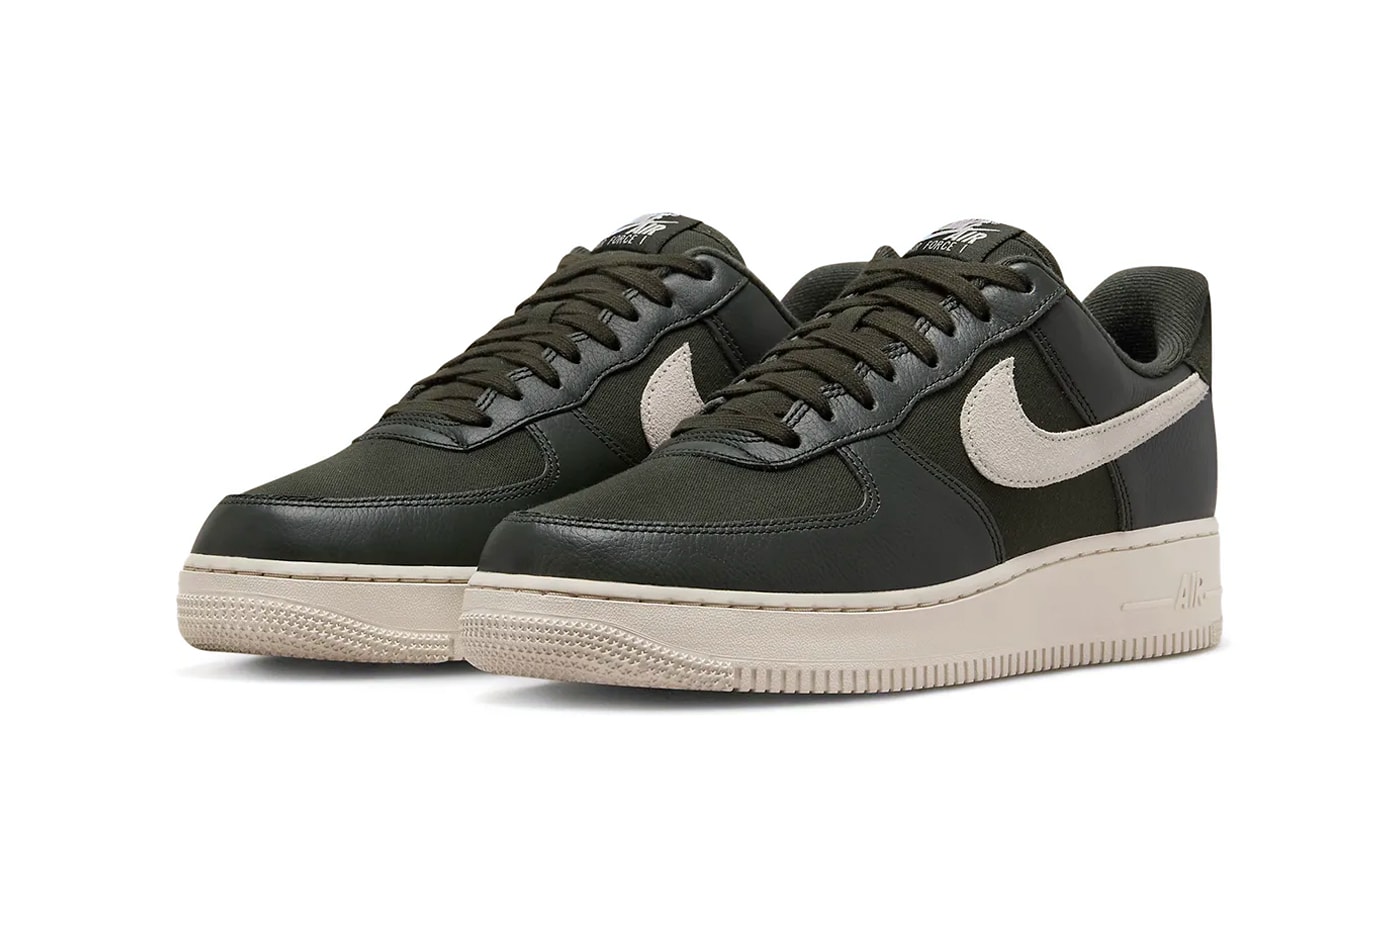 Nike Air Force 1 Low "Sequoia" Has an Official Release Date DV7186-301 Release Info swoosh af1